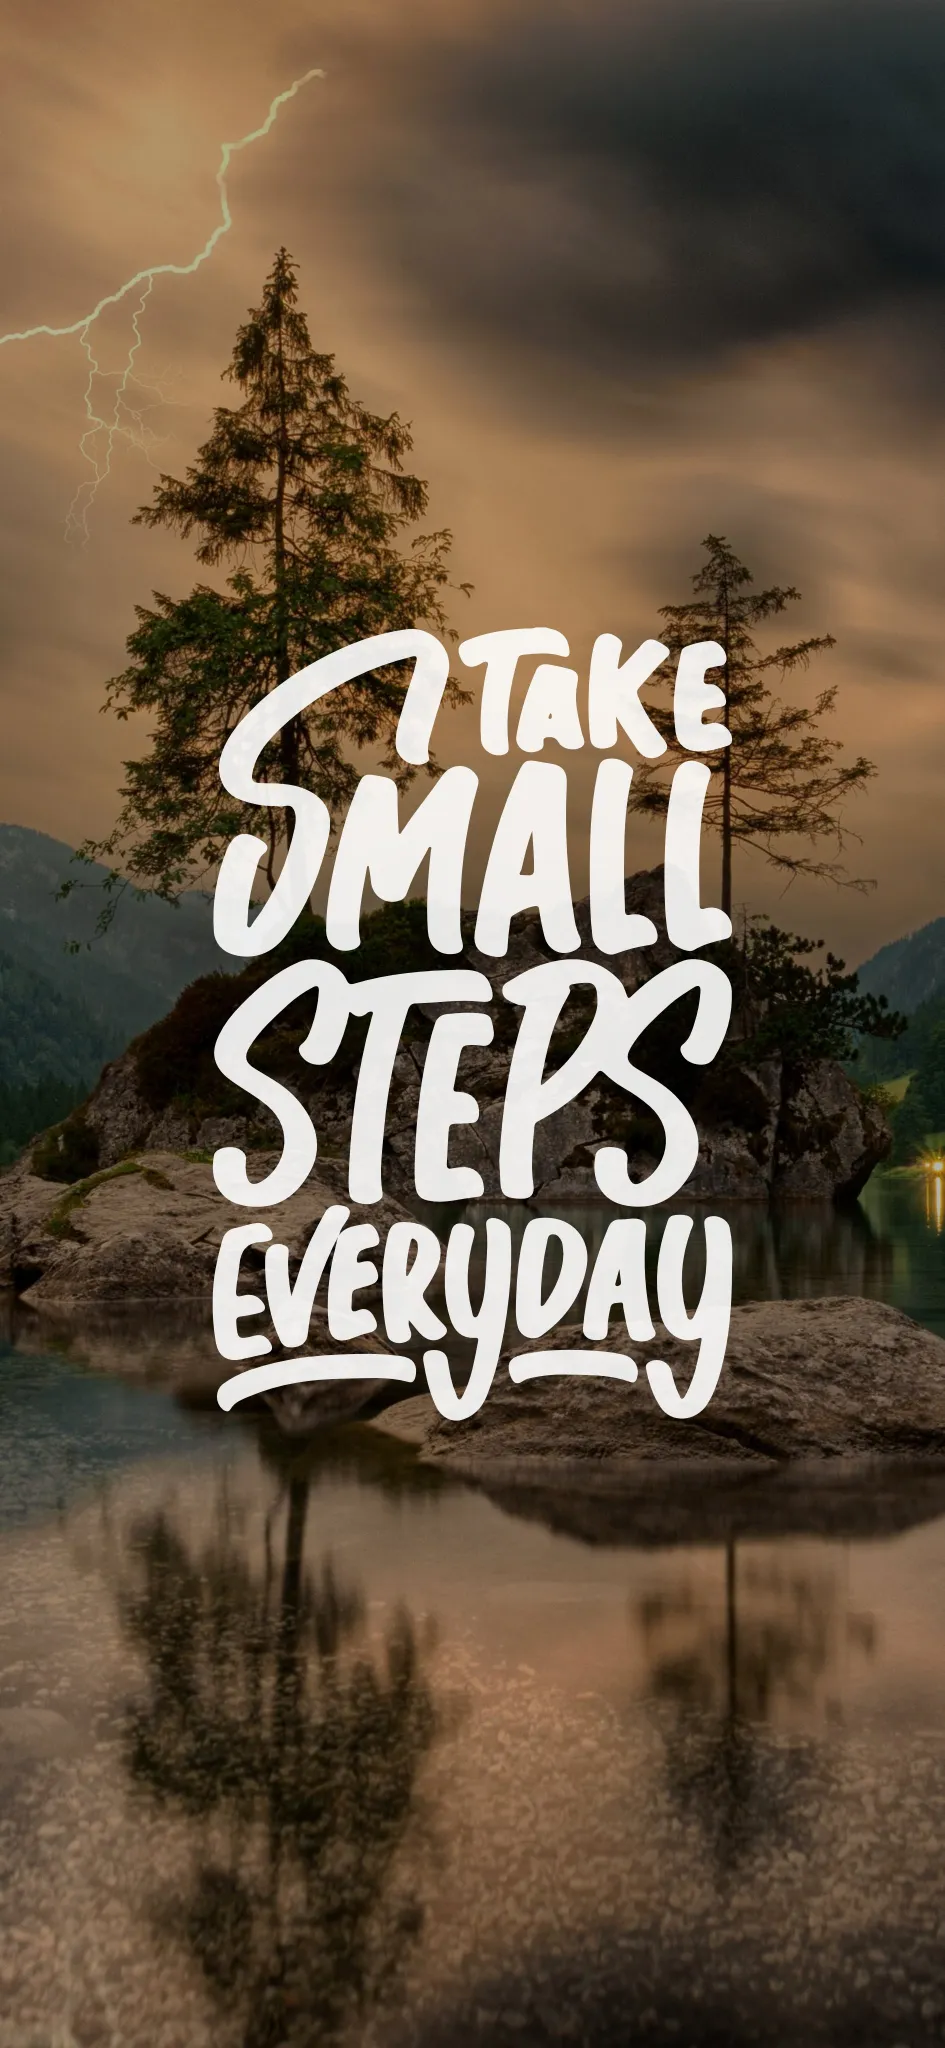 thumb for Take Small Steps Everyday Motivational Quotes Wallpaper